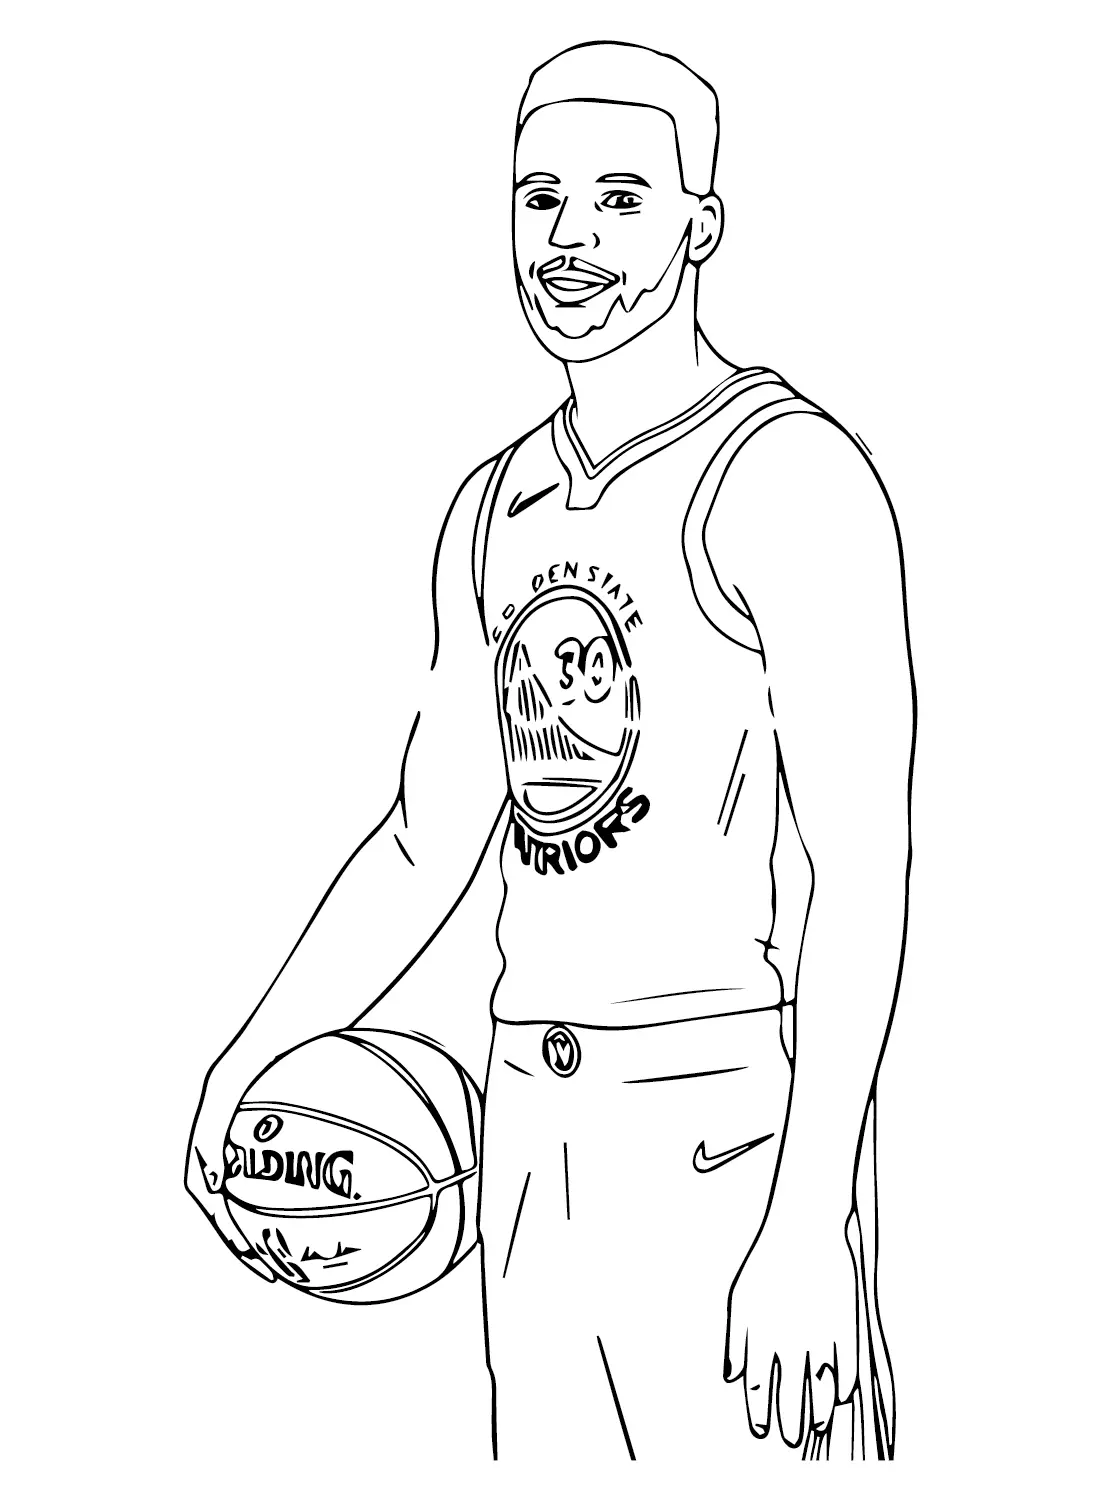 Stephen Curry Coloring Pages